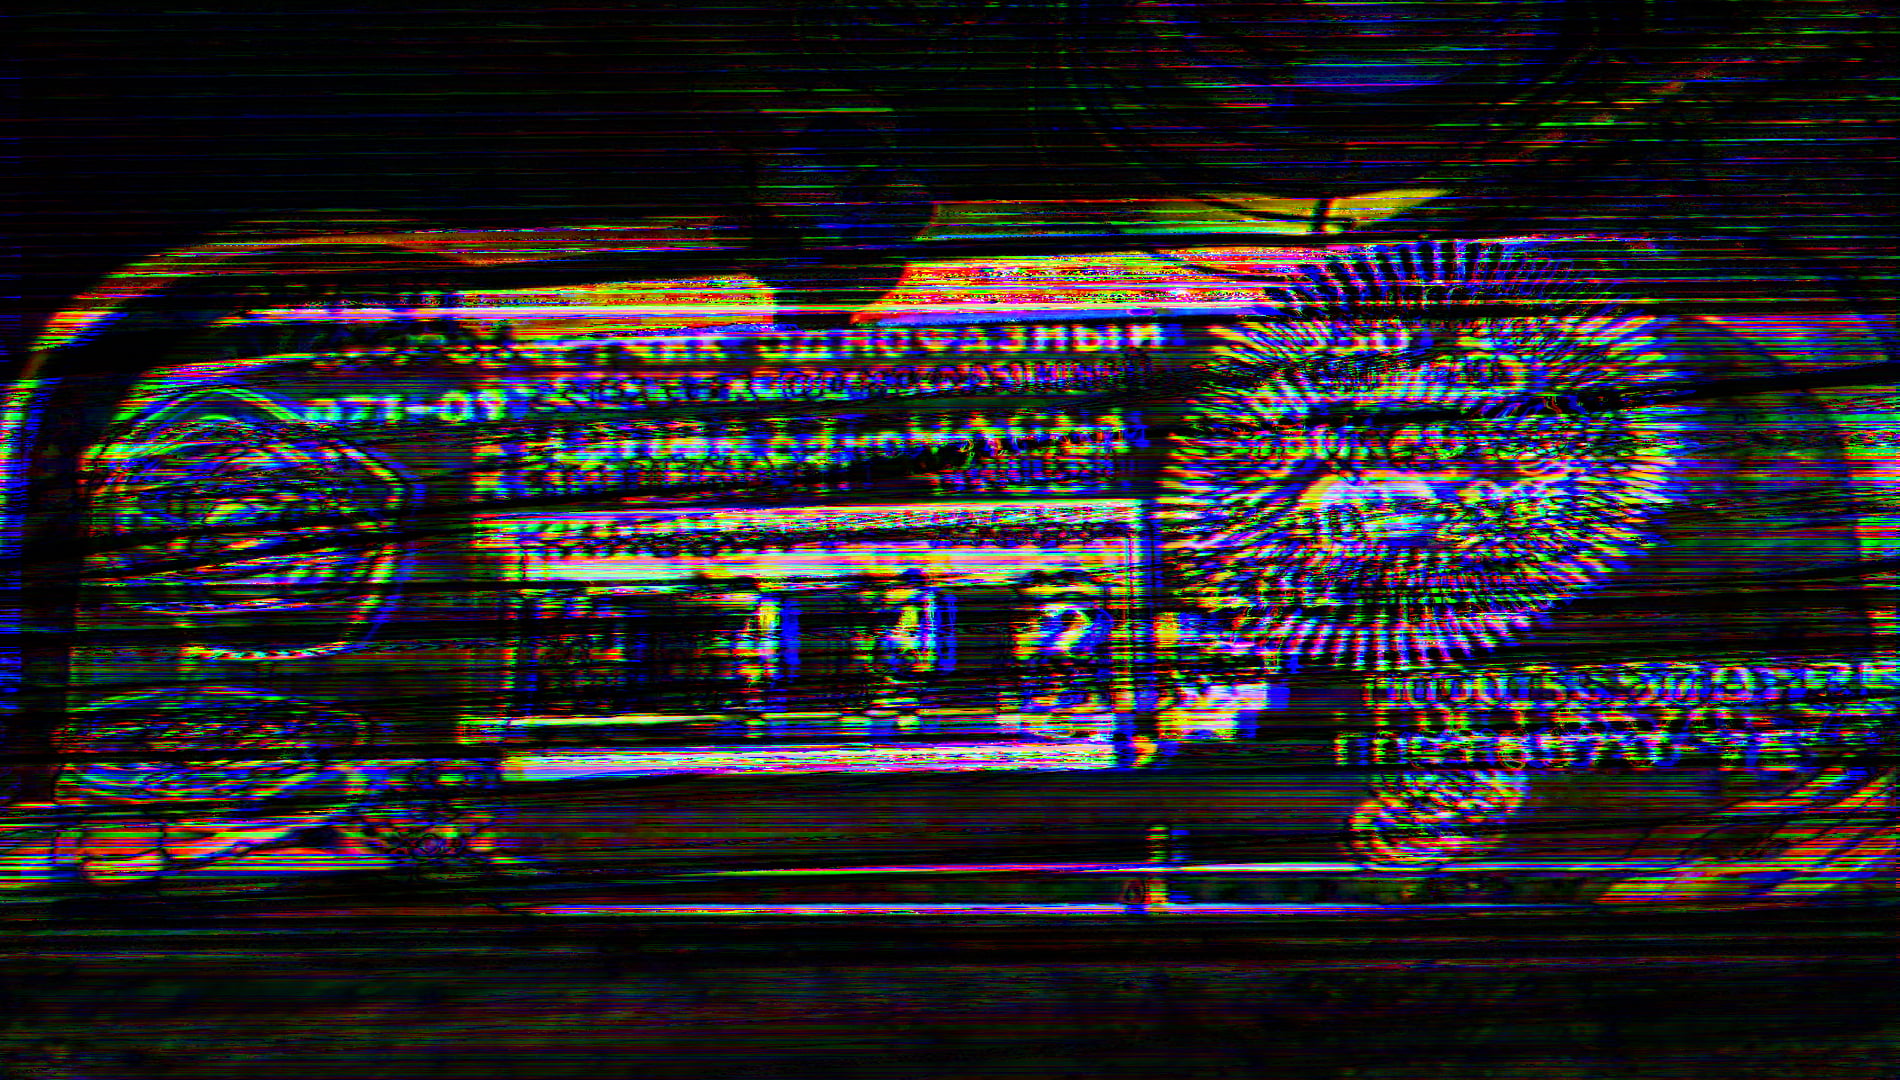 A colorful image of a radio with a TV effect - Black glitch